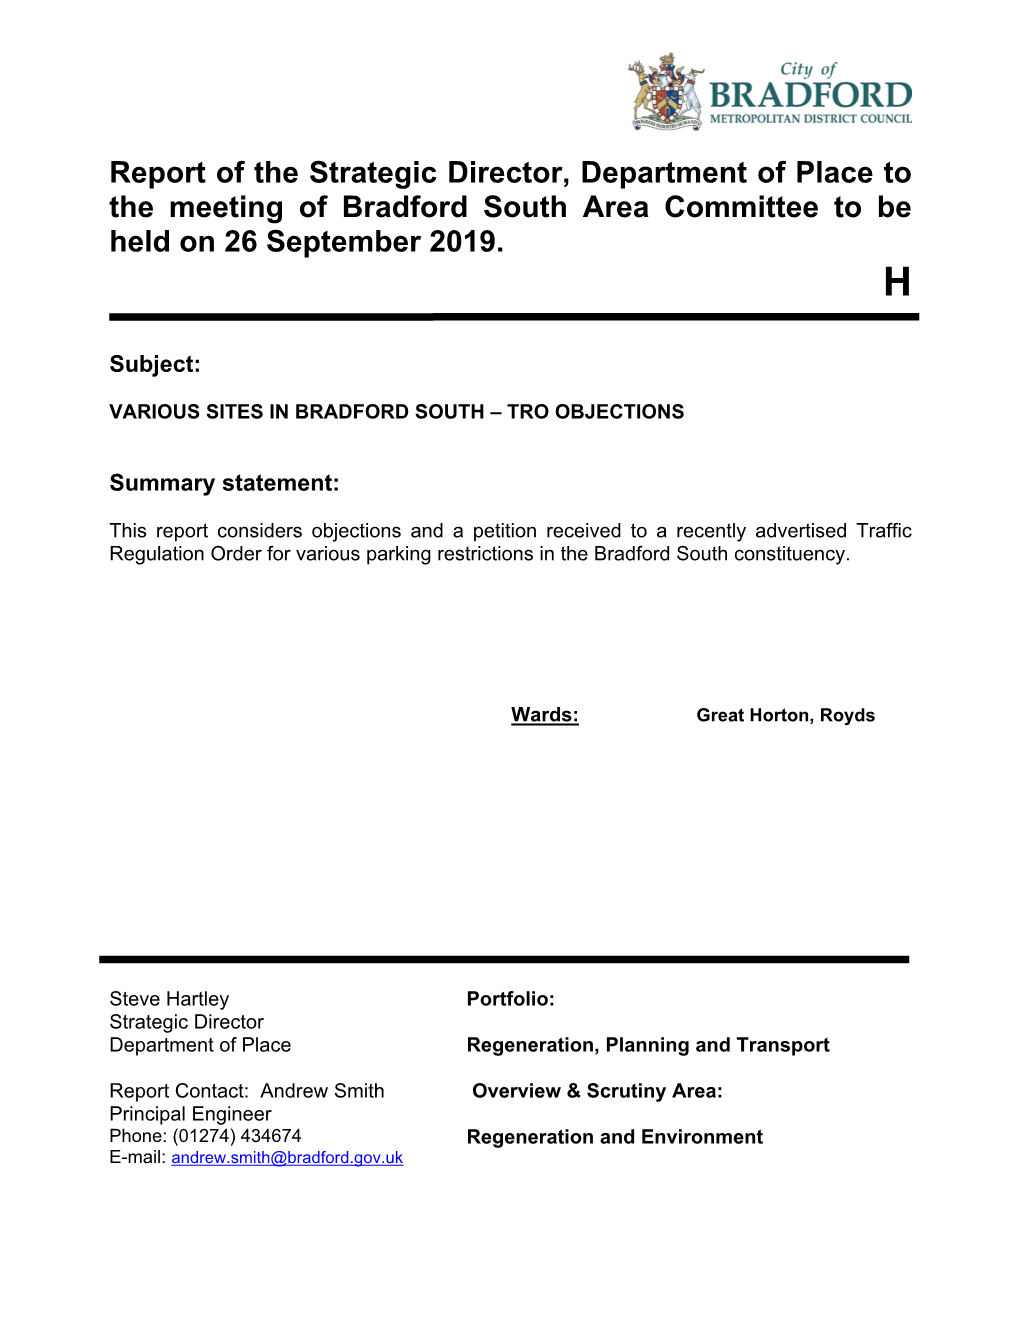 Various Sites in Bradford South – Tro Objections